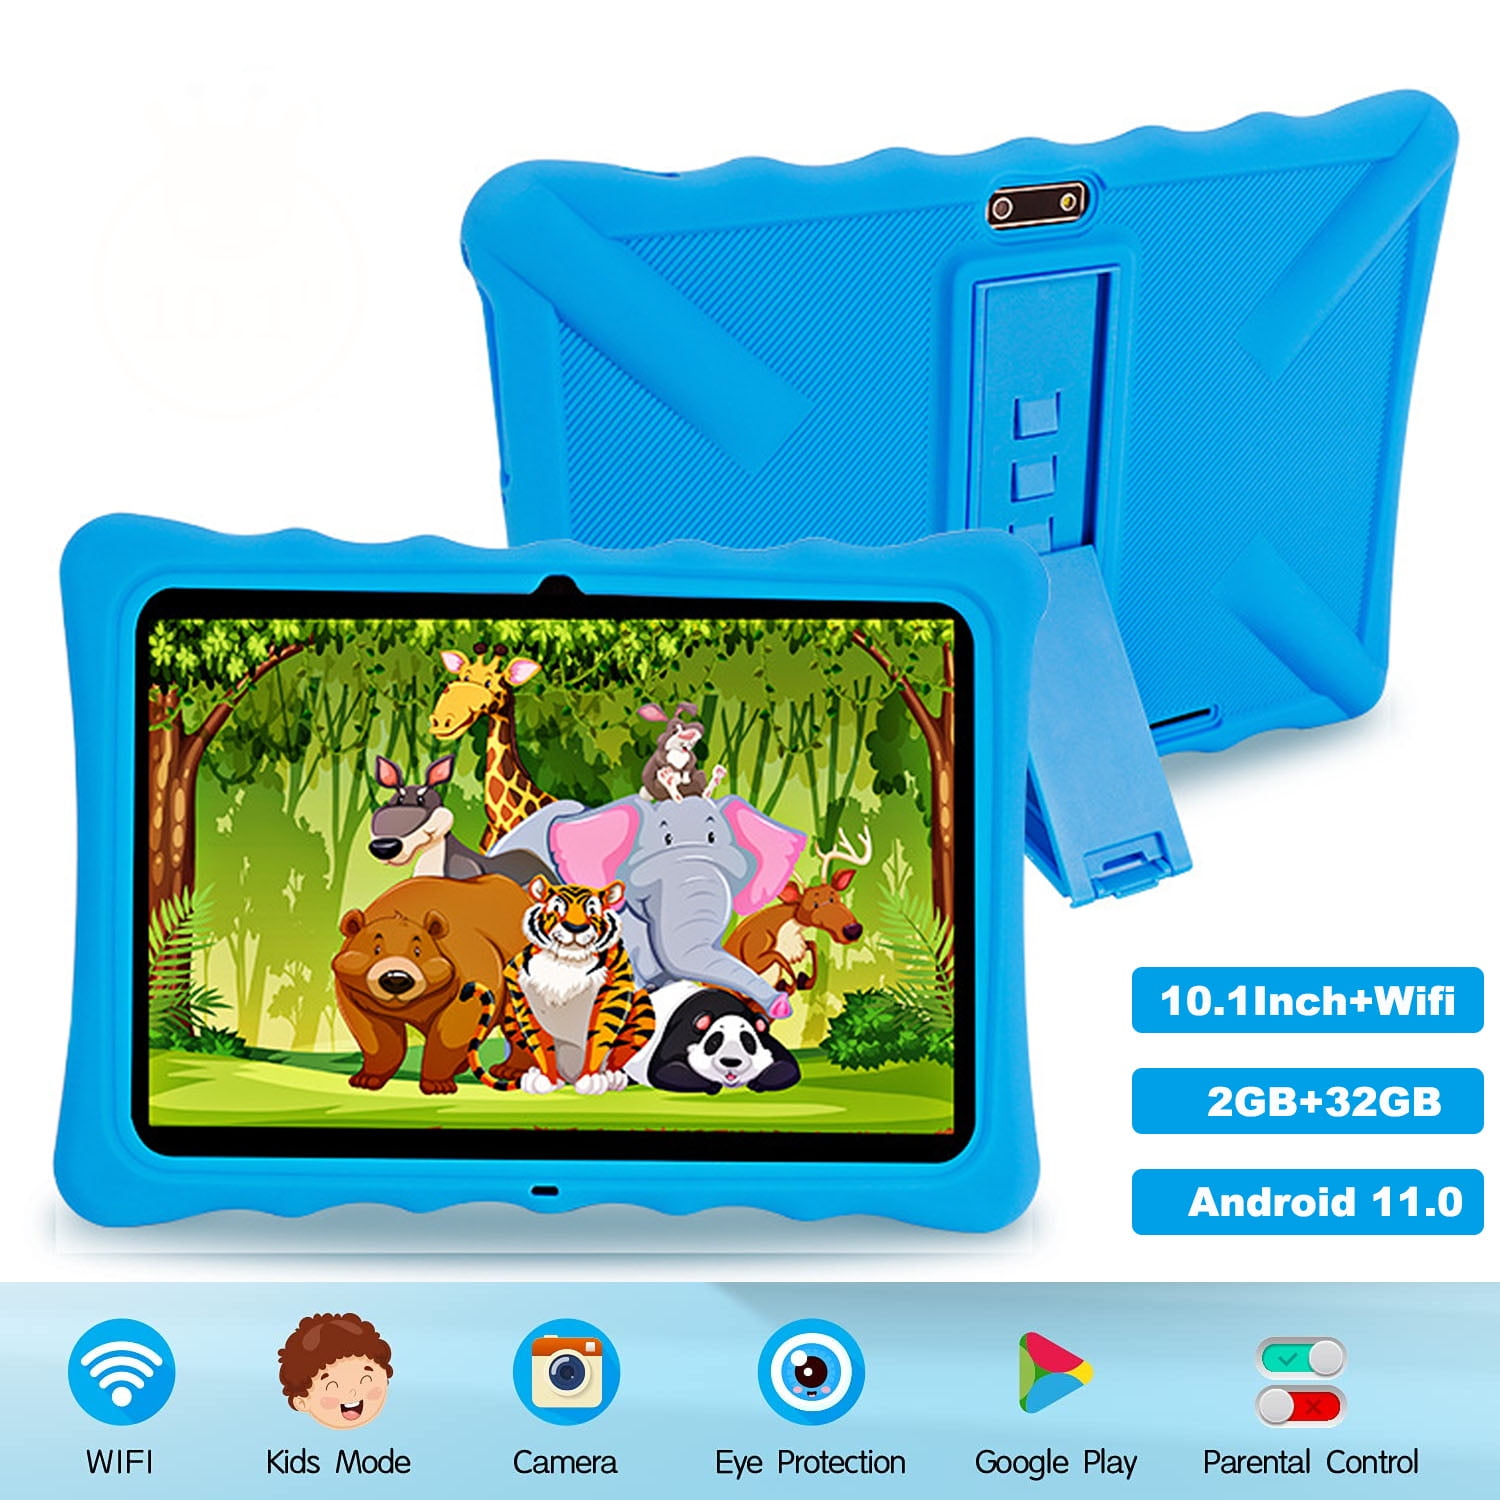 Rioicc 10.1 inch Children's Tablet, 32GB WiFi Android 11 tablet, Pre ...